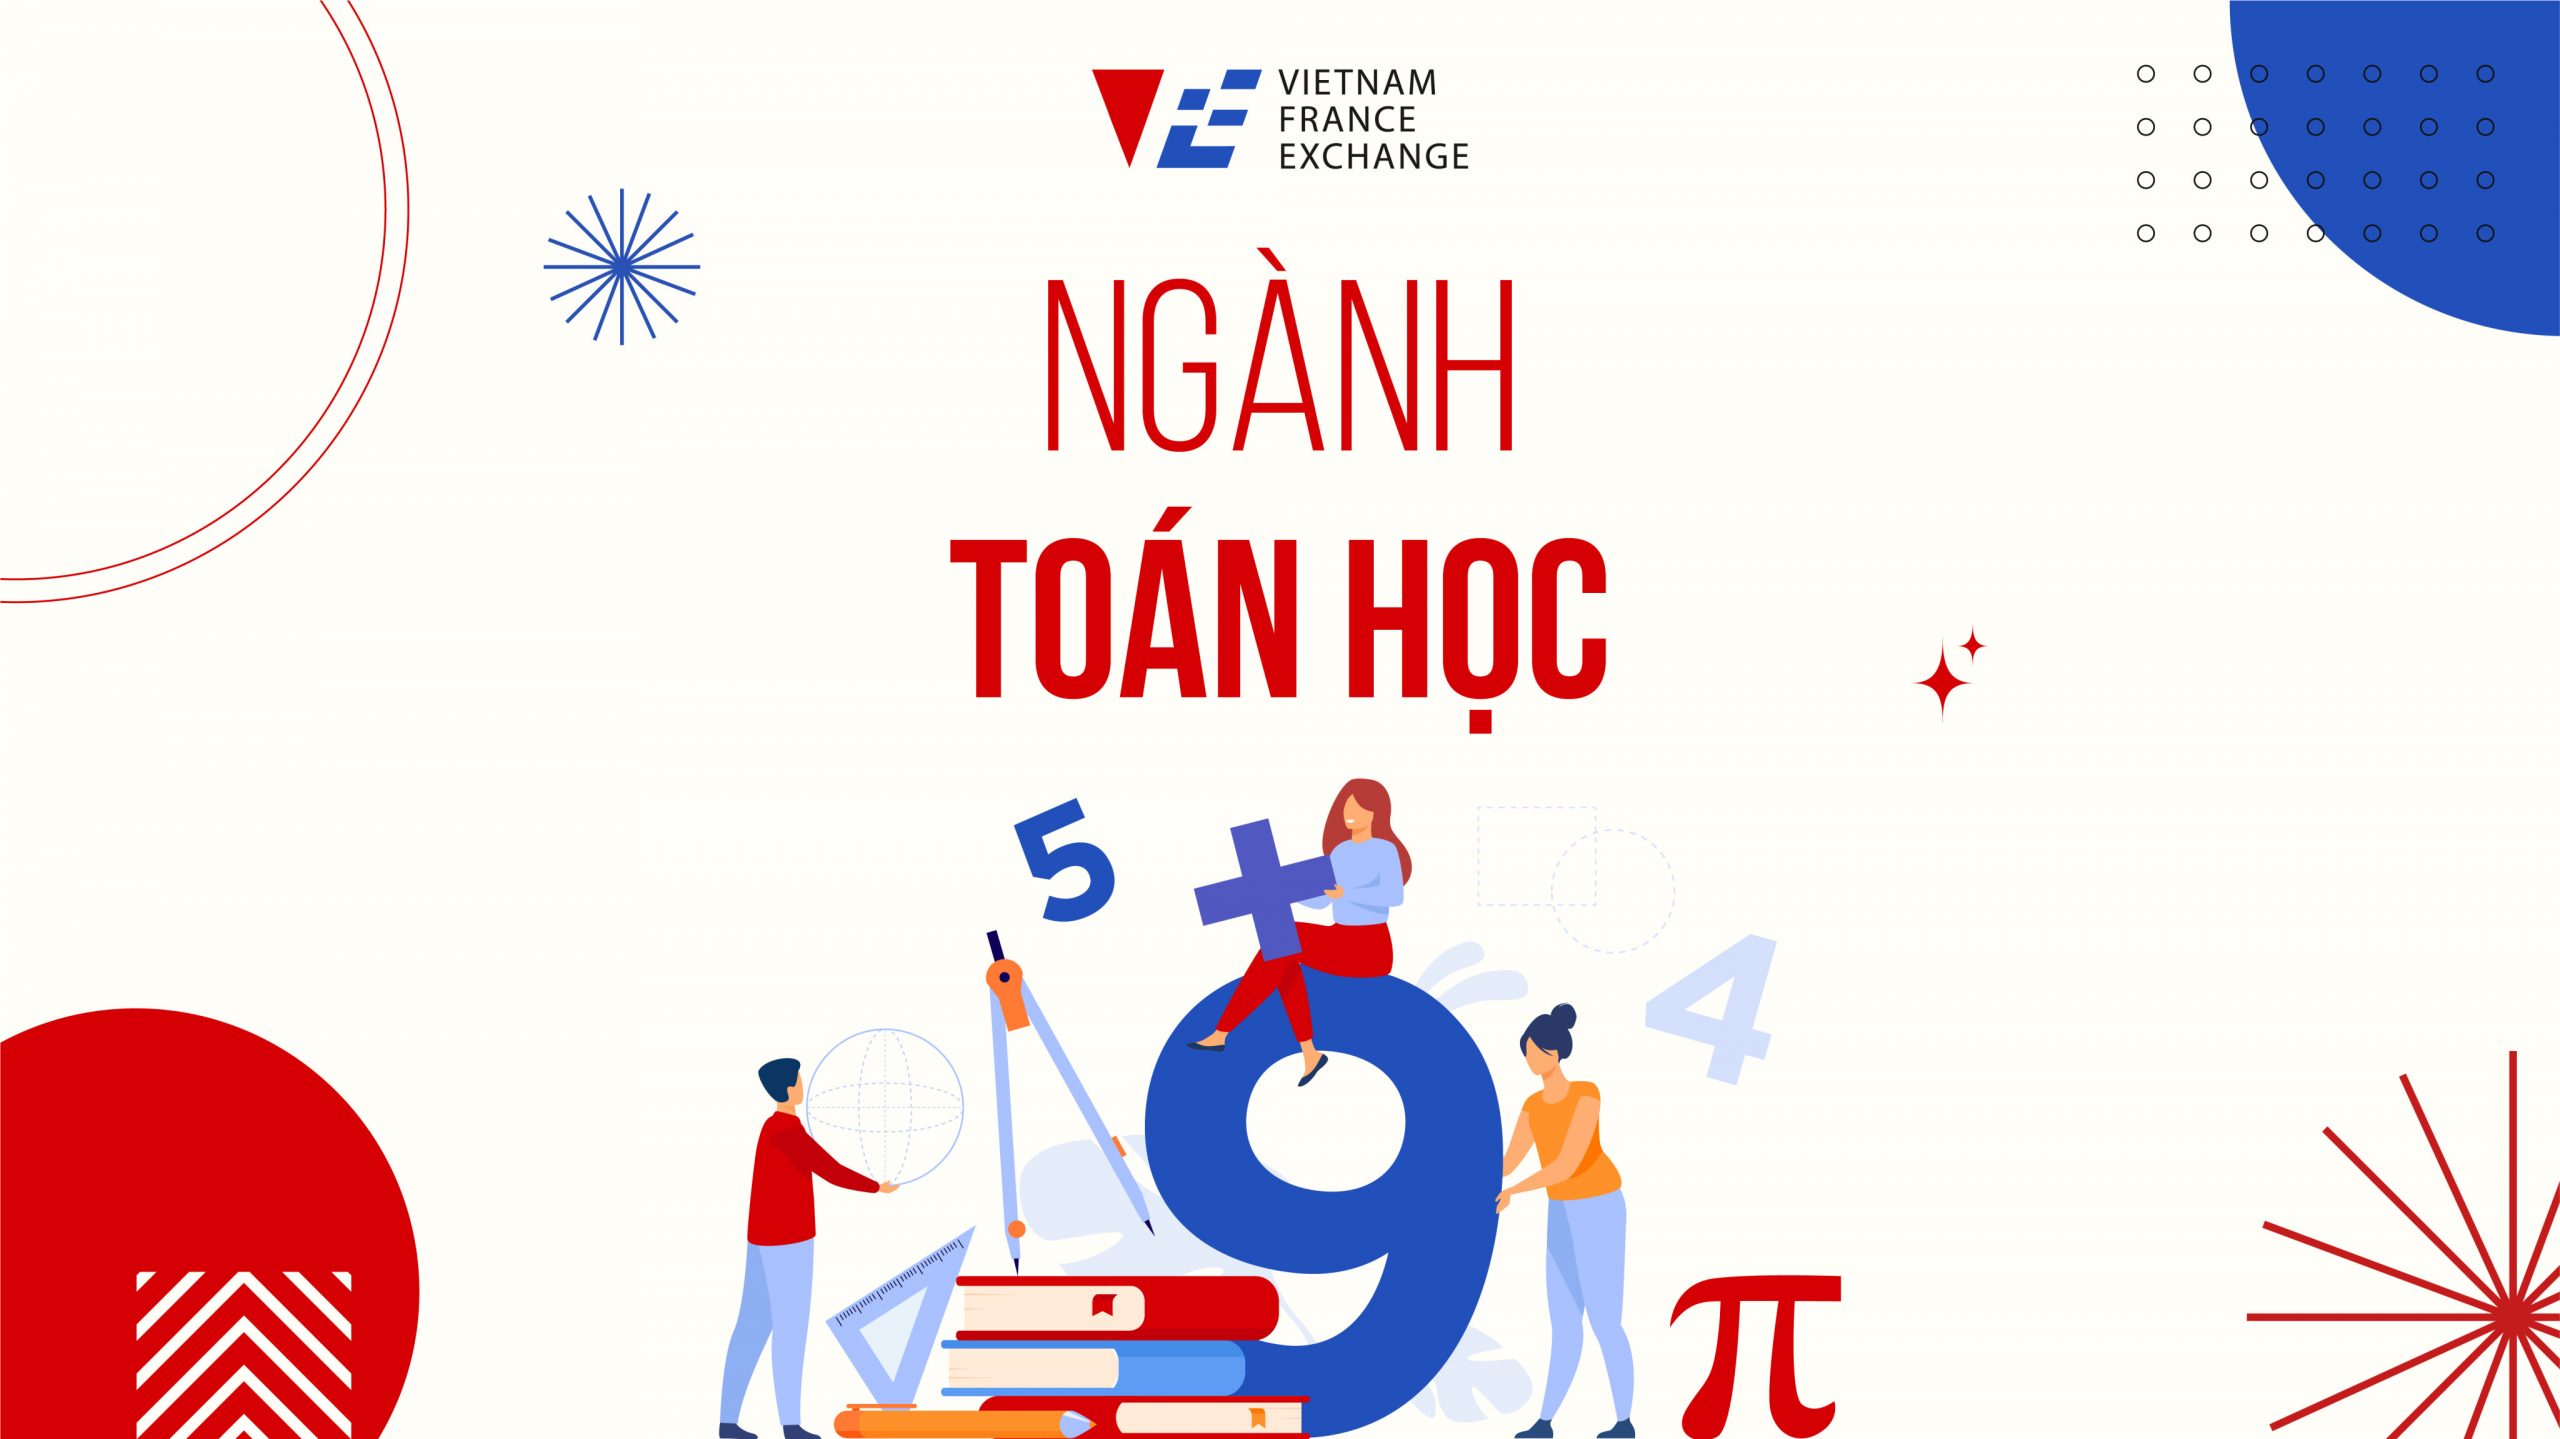 Nganh-toan-hoc-scaled-2